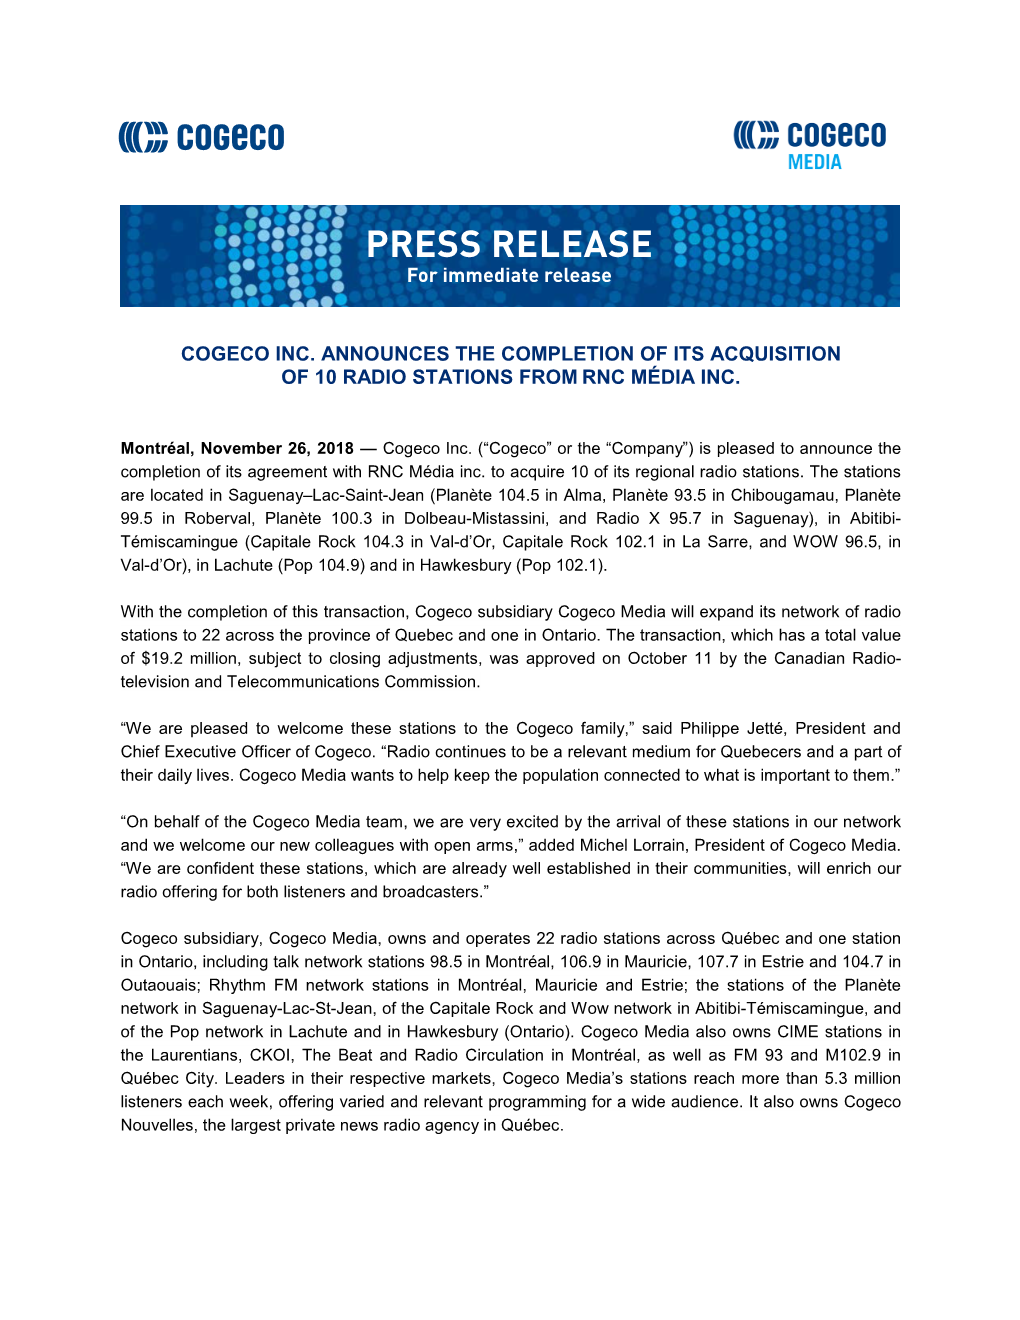 Cogeco Inc. Announces the Completion of Its Acquisition of 10 Radio Stations from Rnc Média Inc